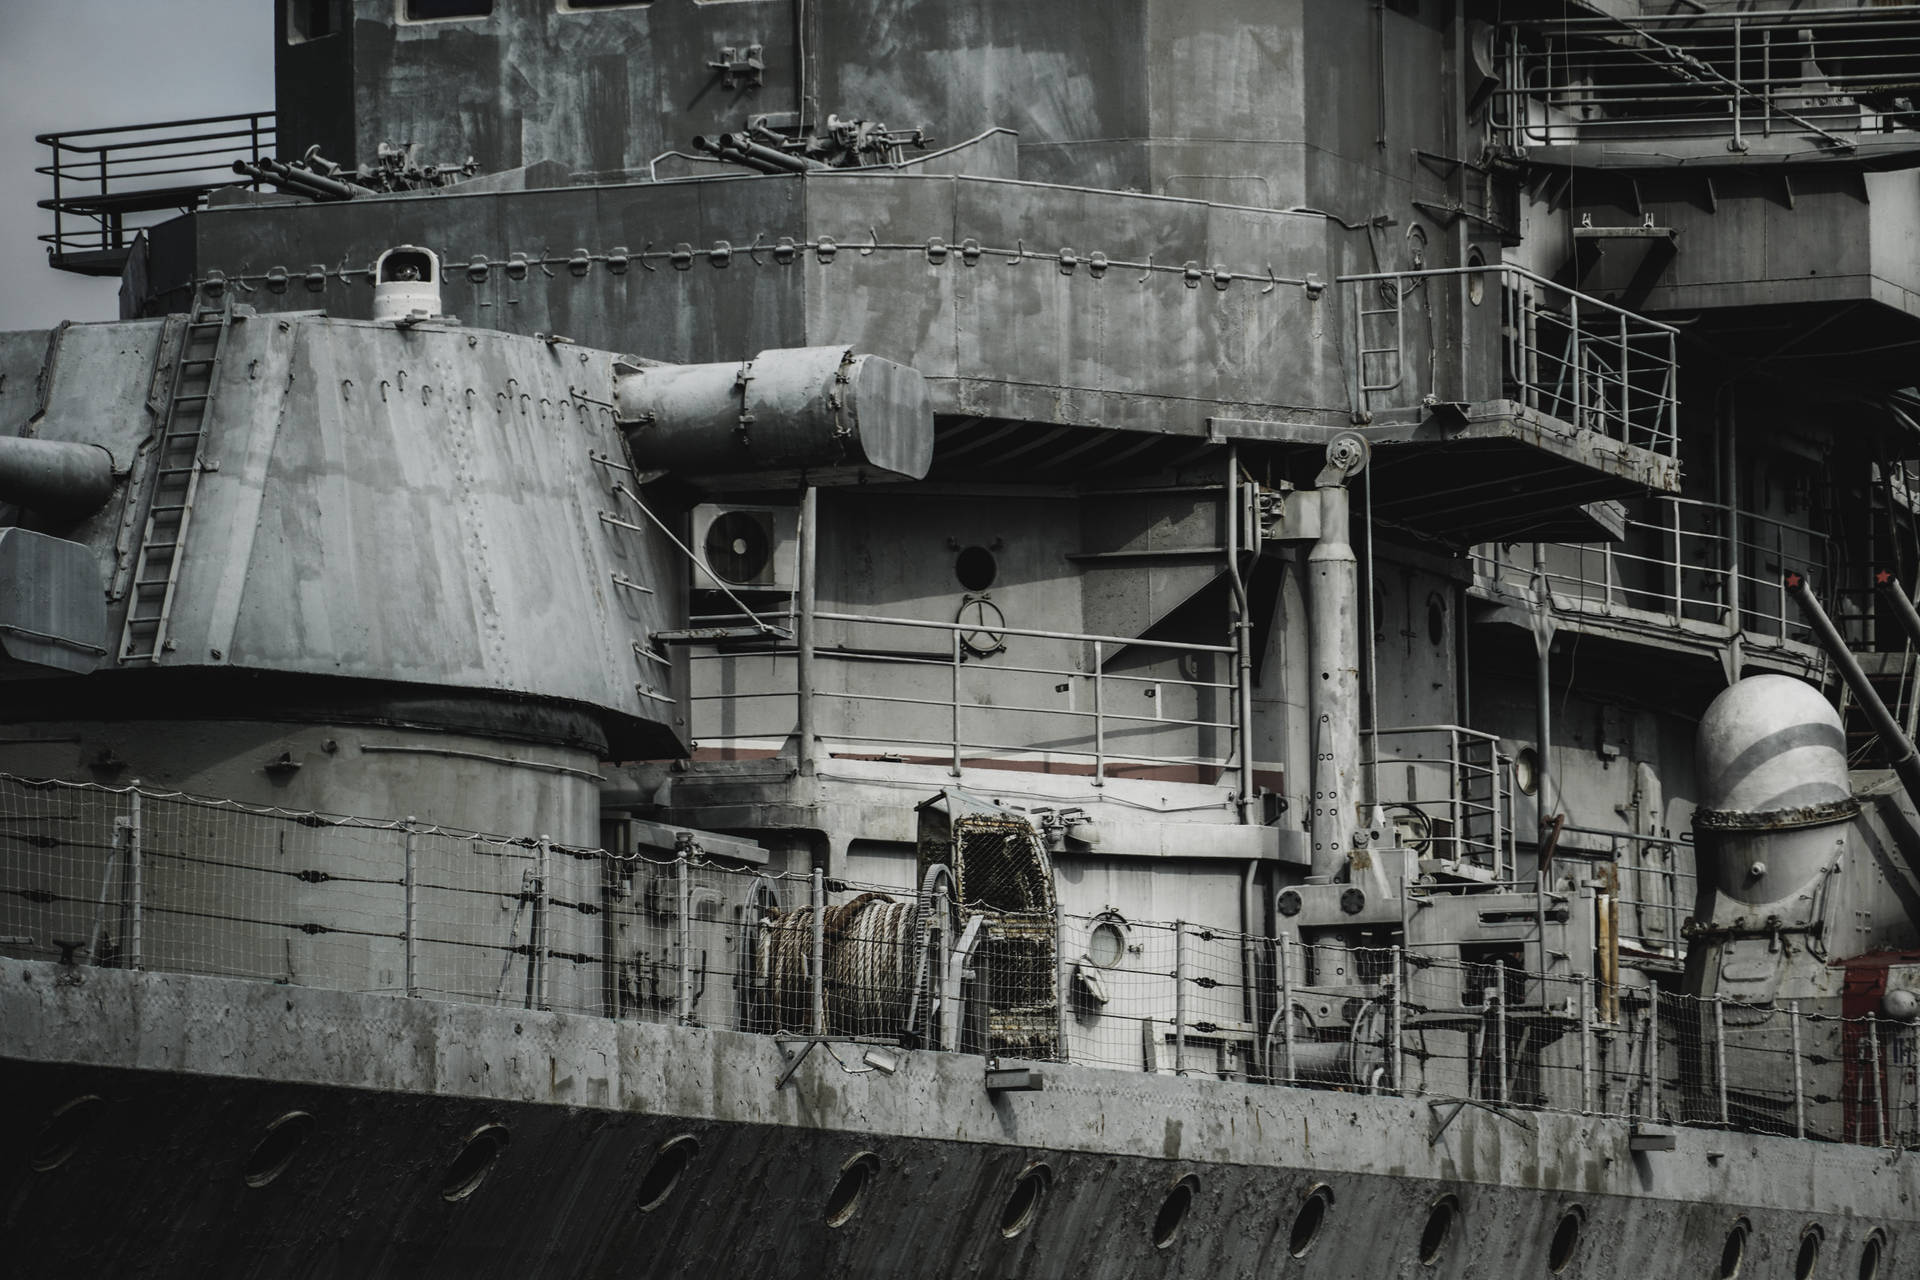 Warship With Worn-out Paint